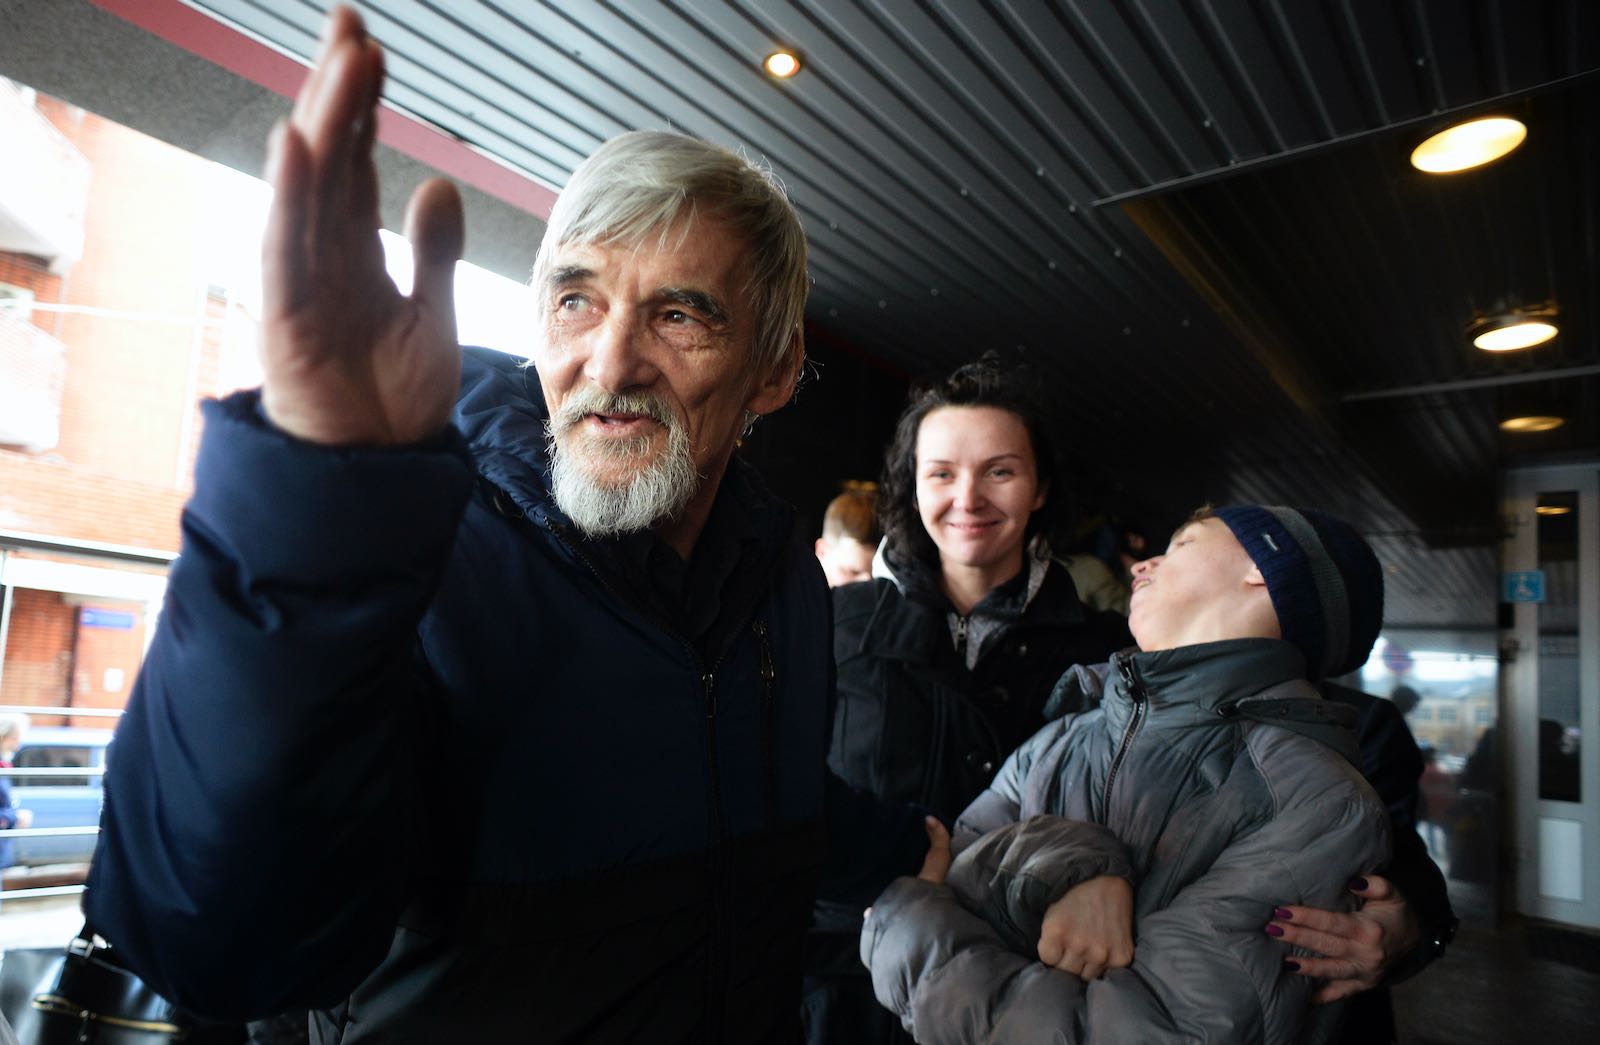 Gulag historian Yuri Dmitriev following his first trial, in which charges of child pornography were dismissed, Petrozavodsk, Russia, April 5, 2018